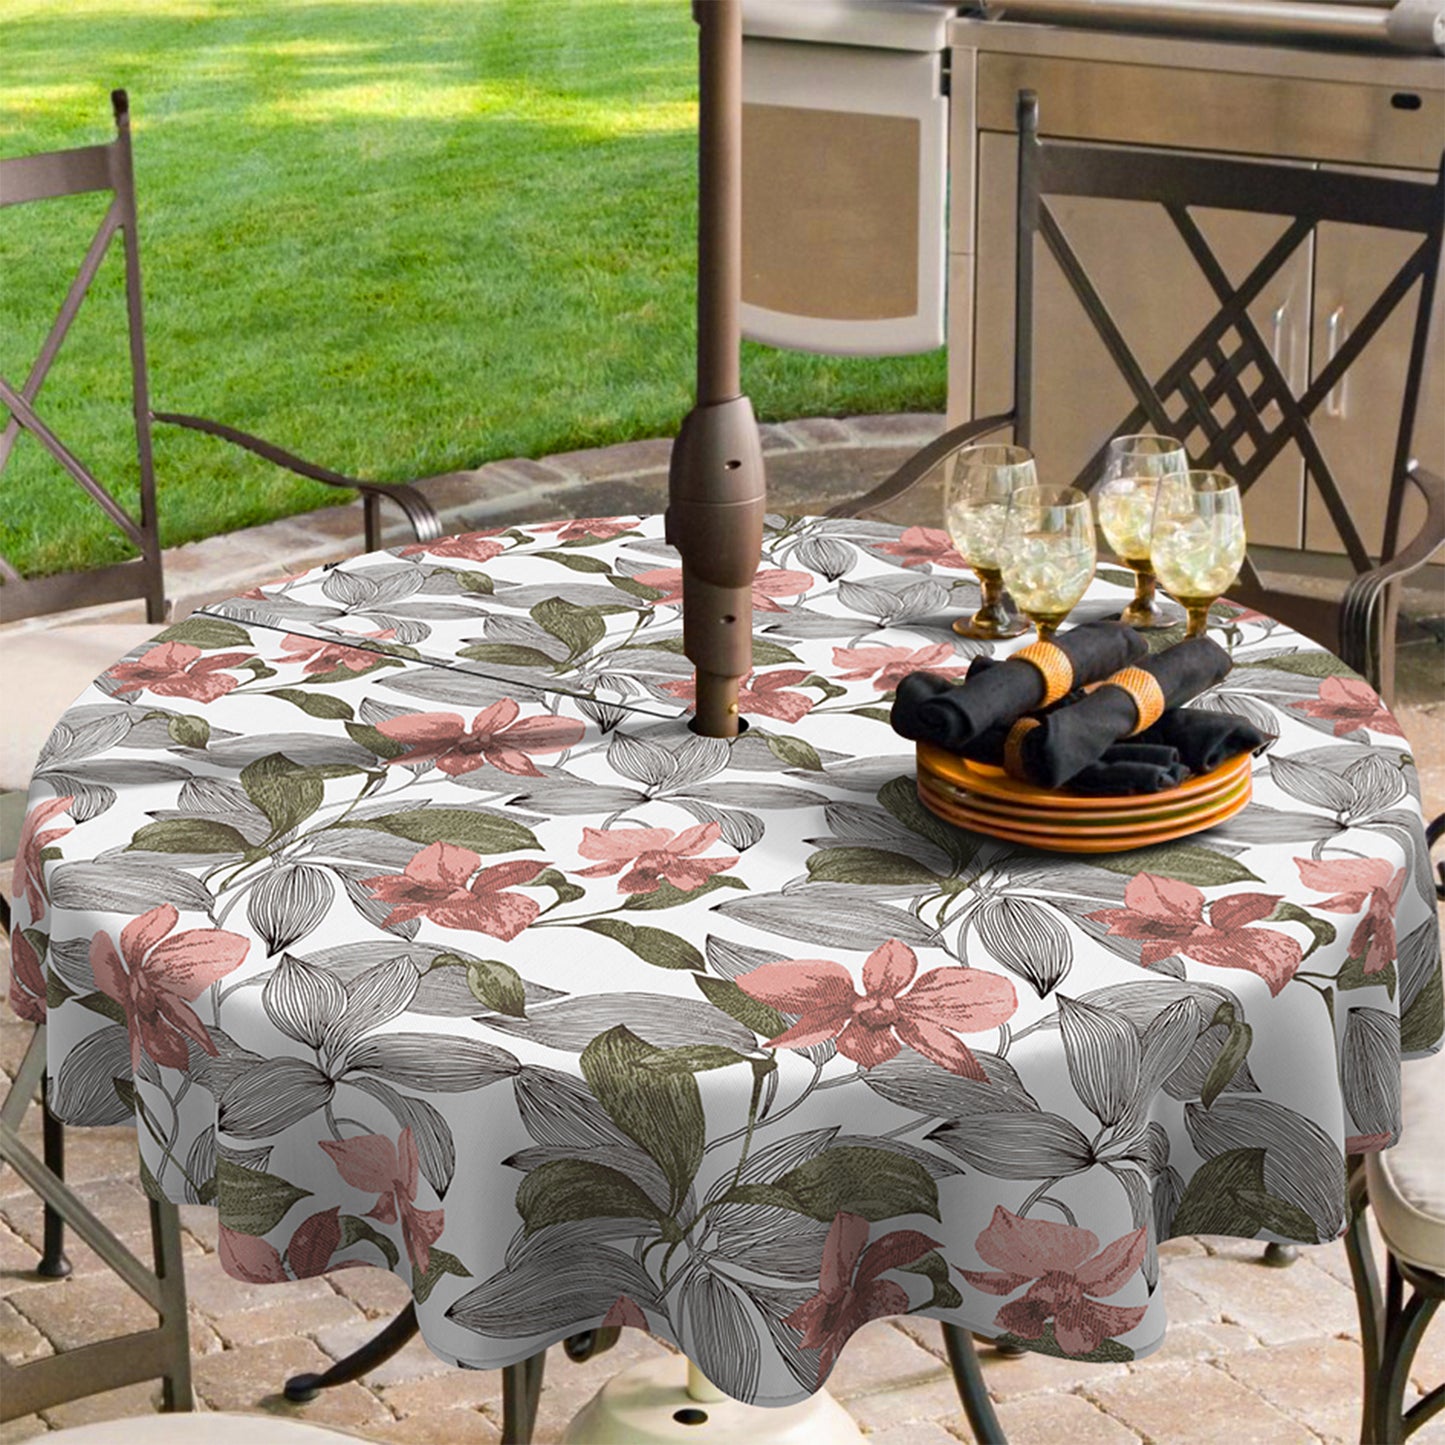 Melody Elephant Outdoor/Indoor Round Tablecloth with Umbrella Hole Zipper, Decorative Circular Table Cover for Home Garden, 60 Inch, Clemens Noir Pink